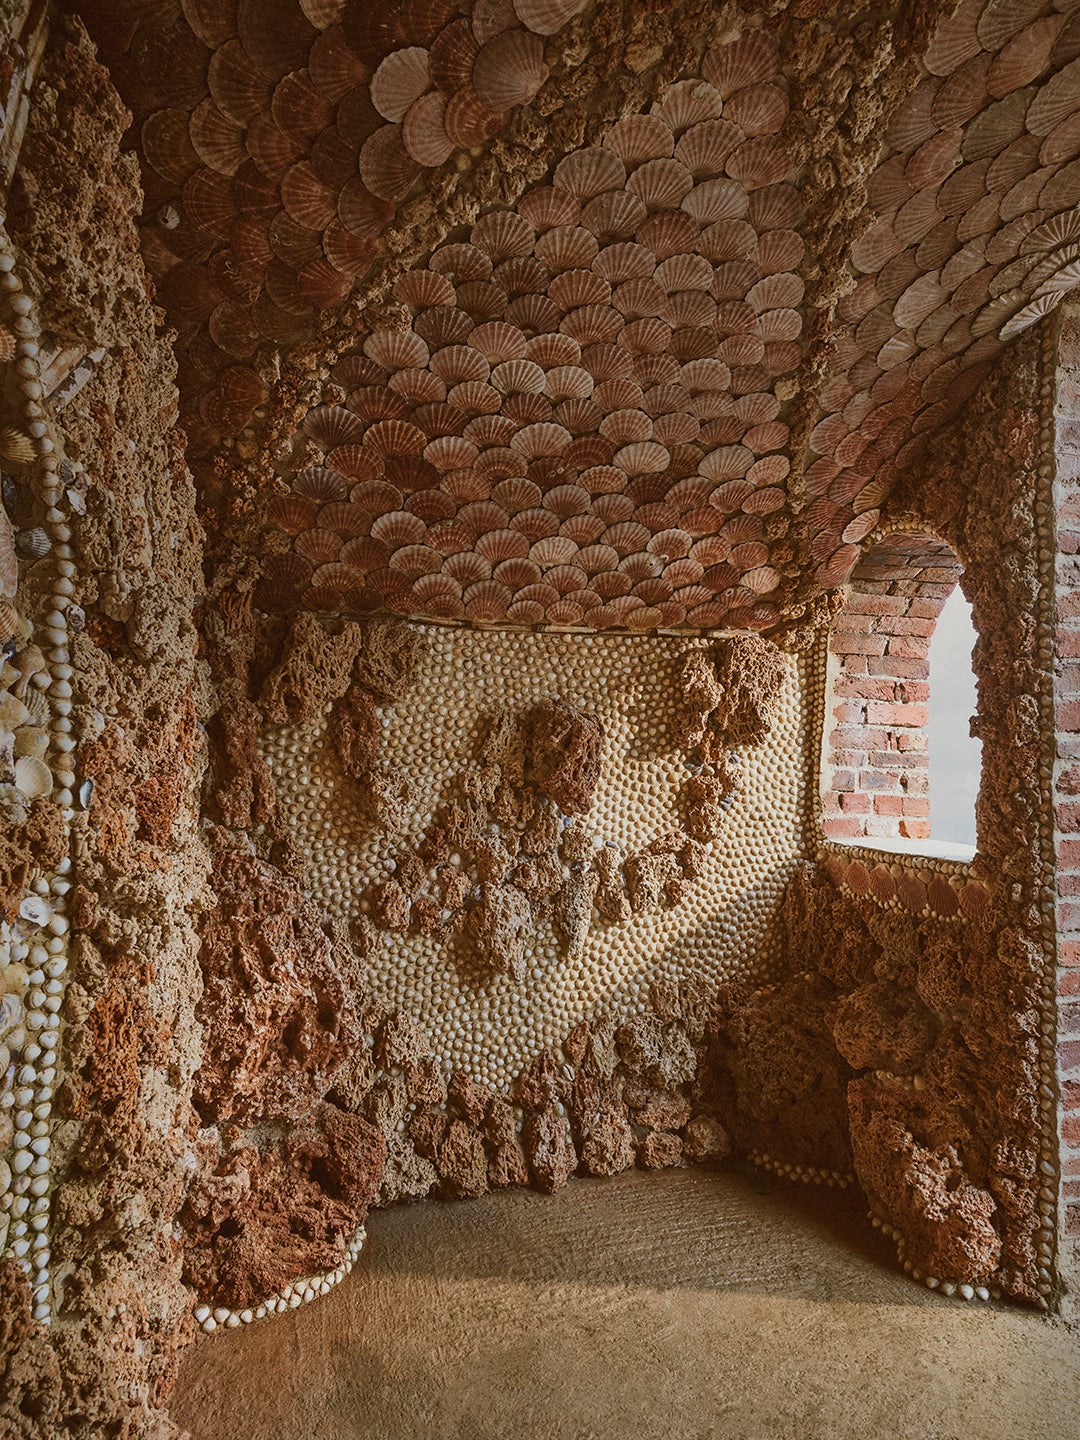 shellwork grotto with window